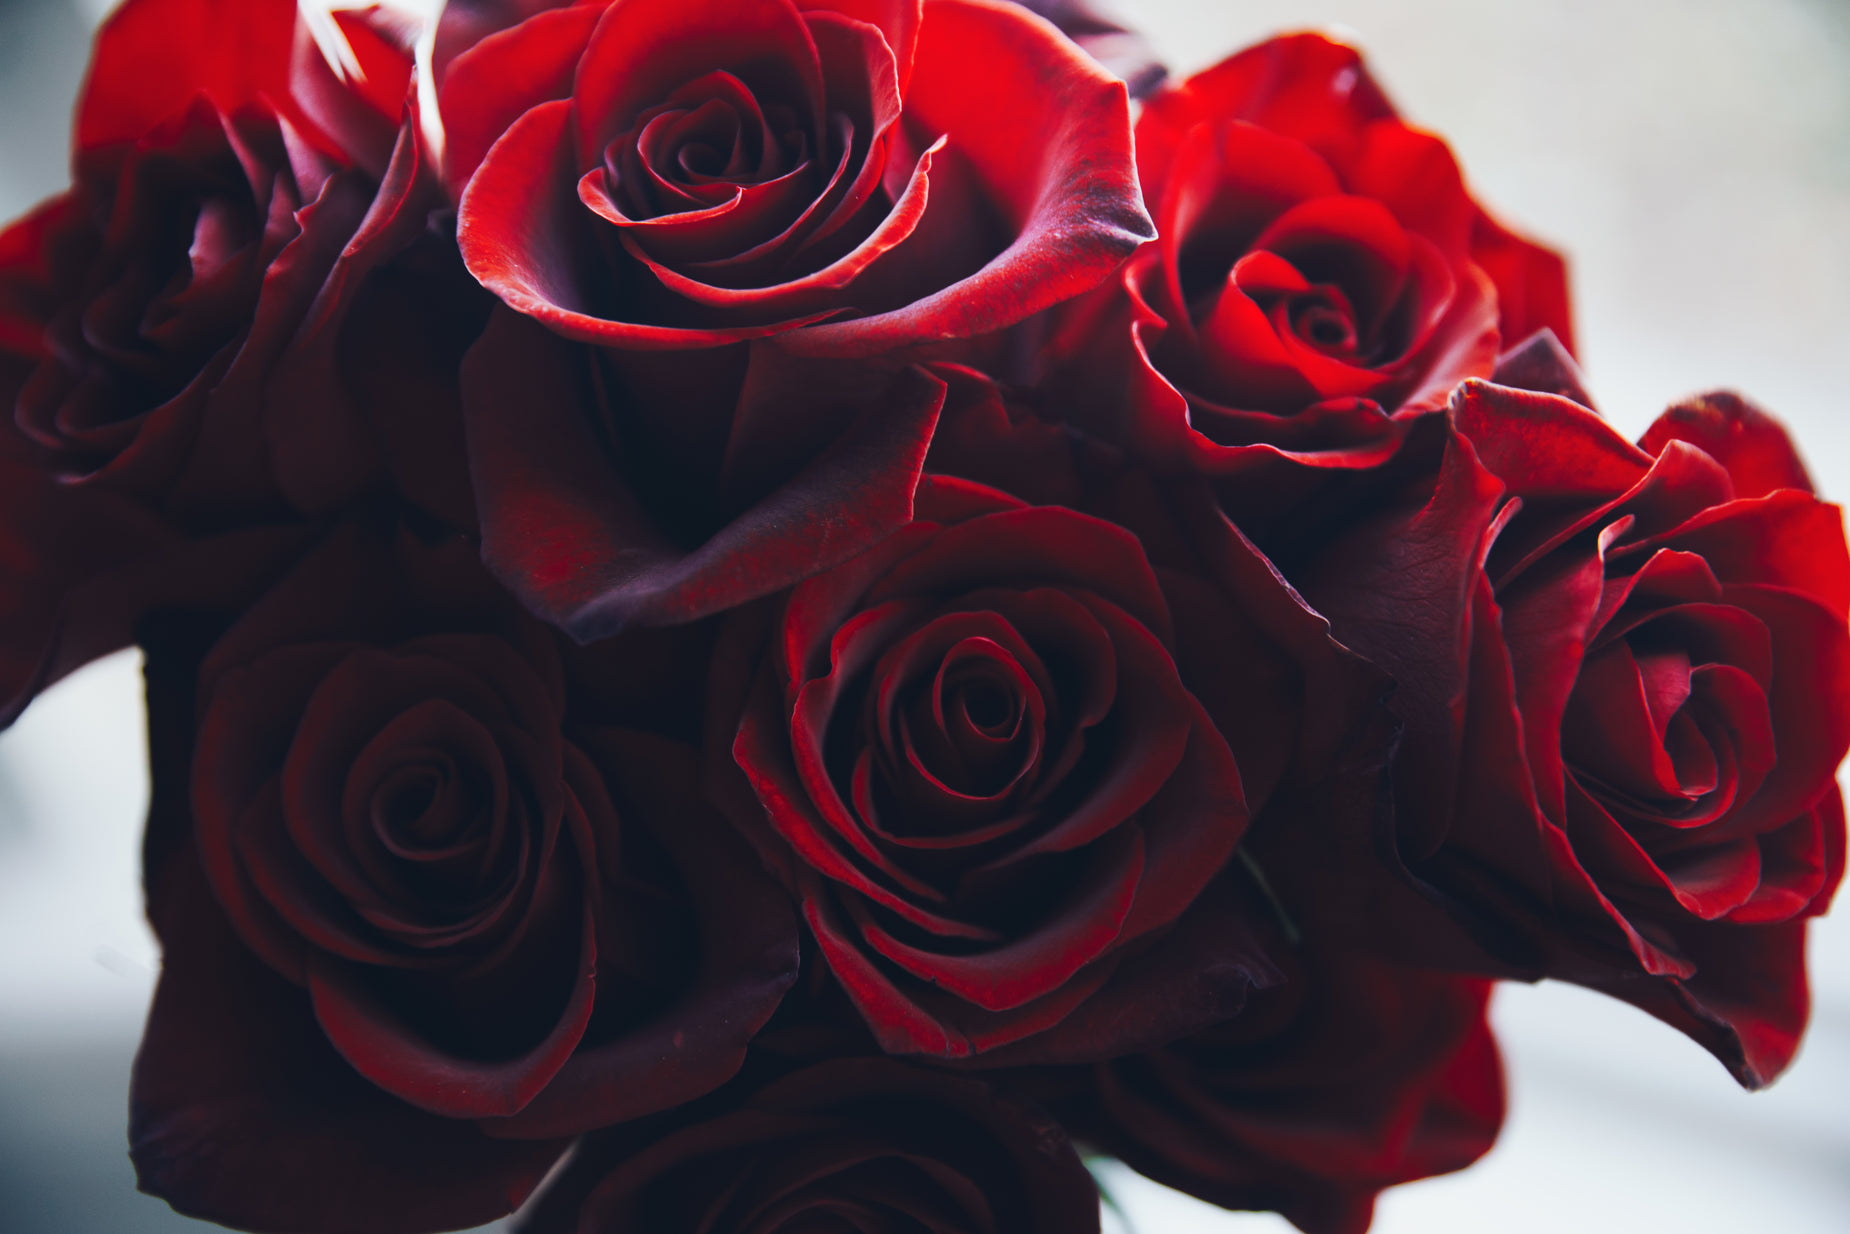 a bouquet of red roses with many open petals